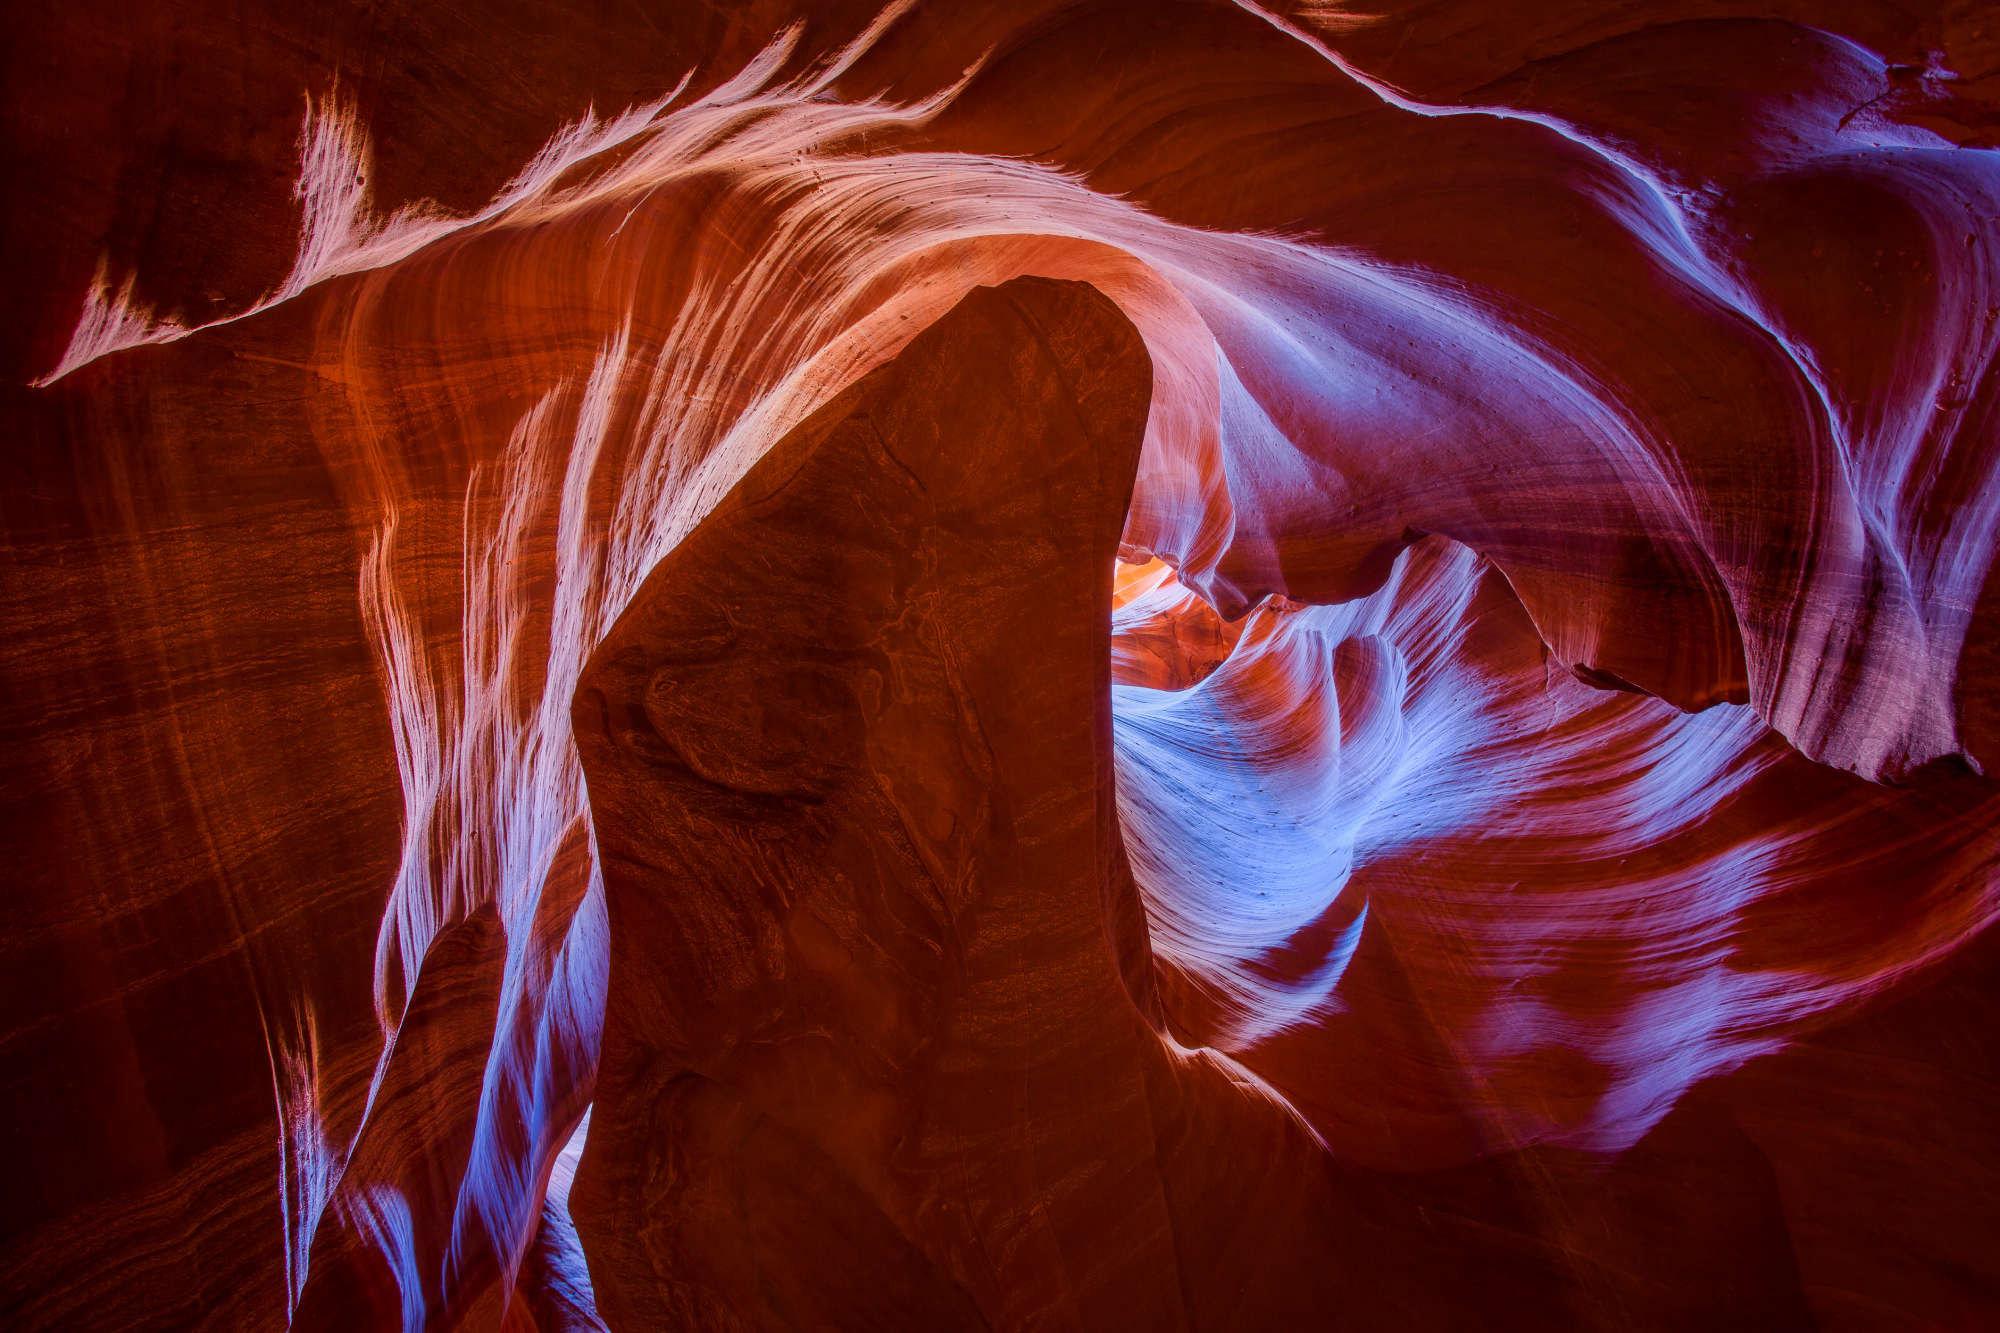 HDR Photography Workshop: Antelope Canyon HDR | Pt.3 | HDR Processing